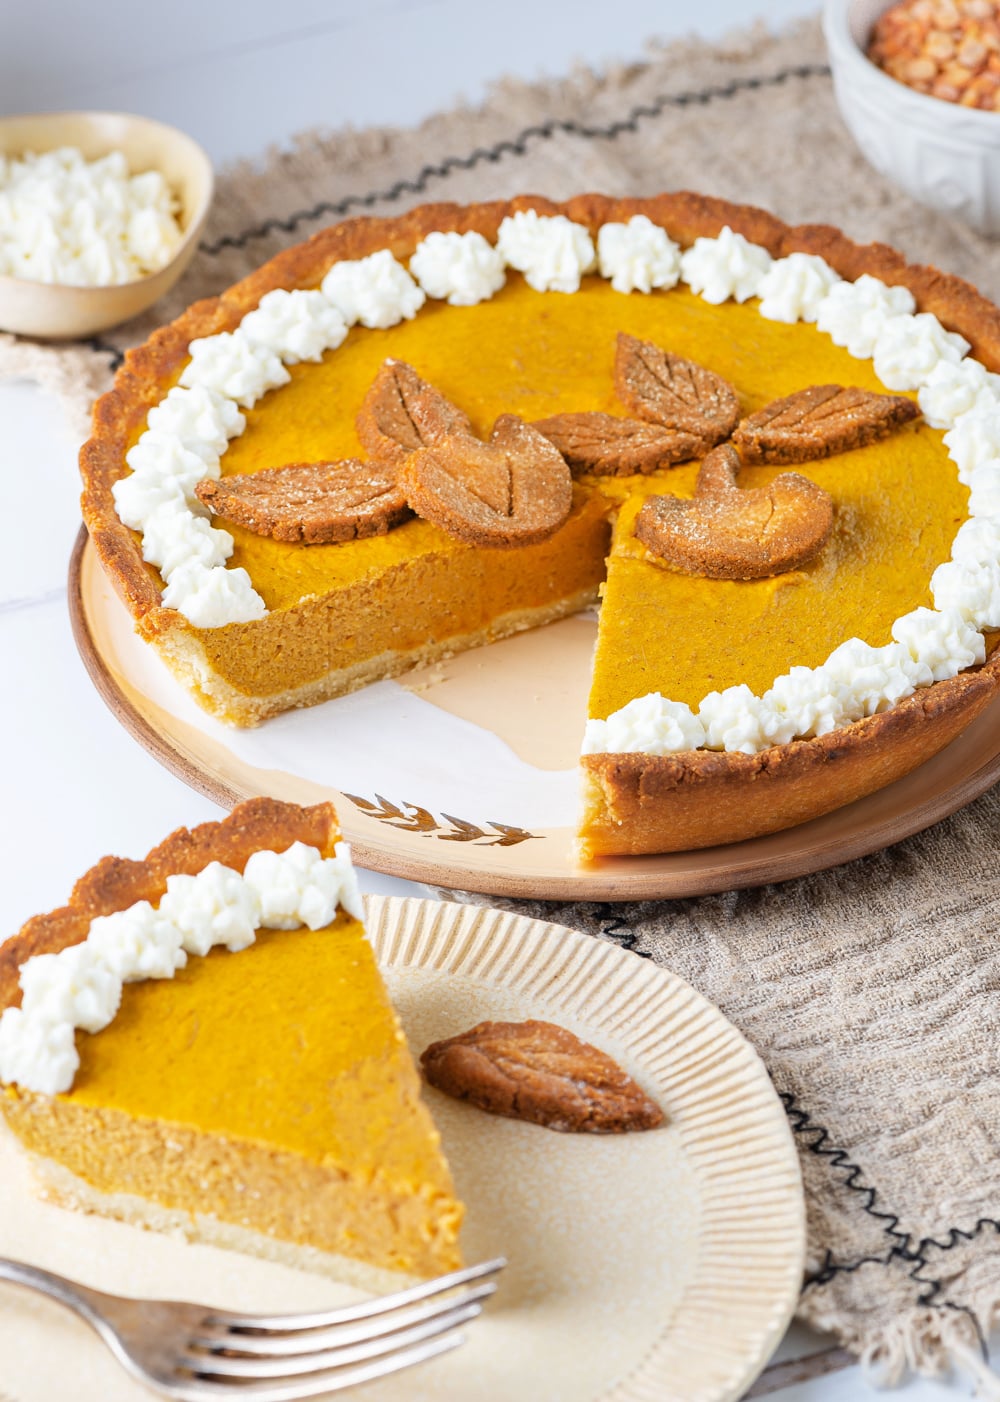 A slice of pumpkin pie set next to the rest of the pie.